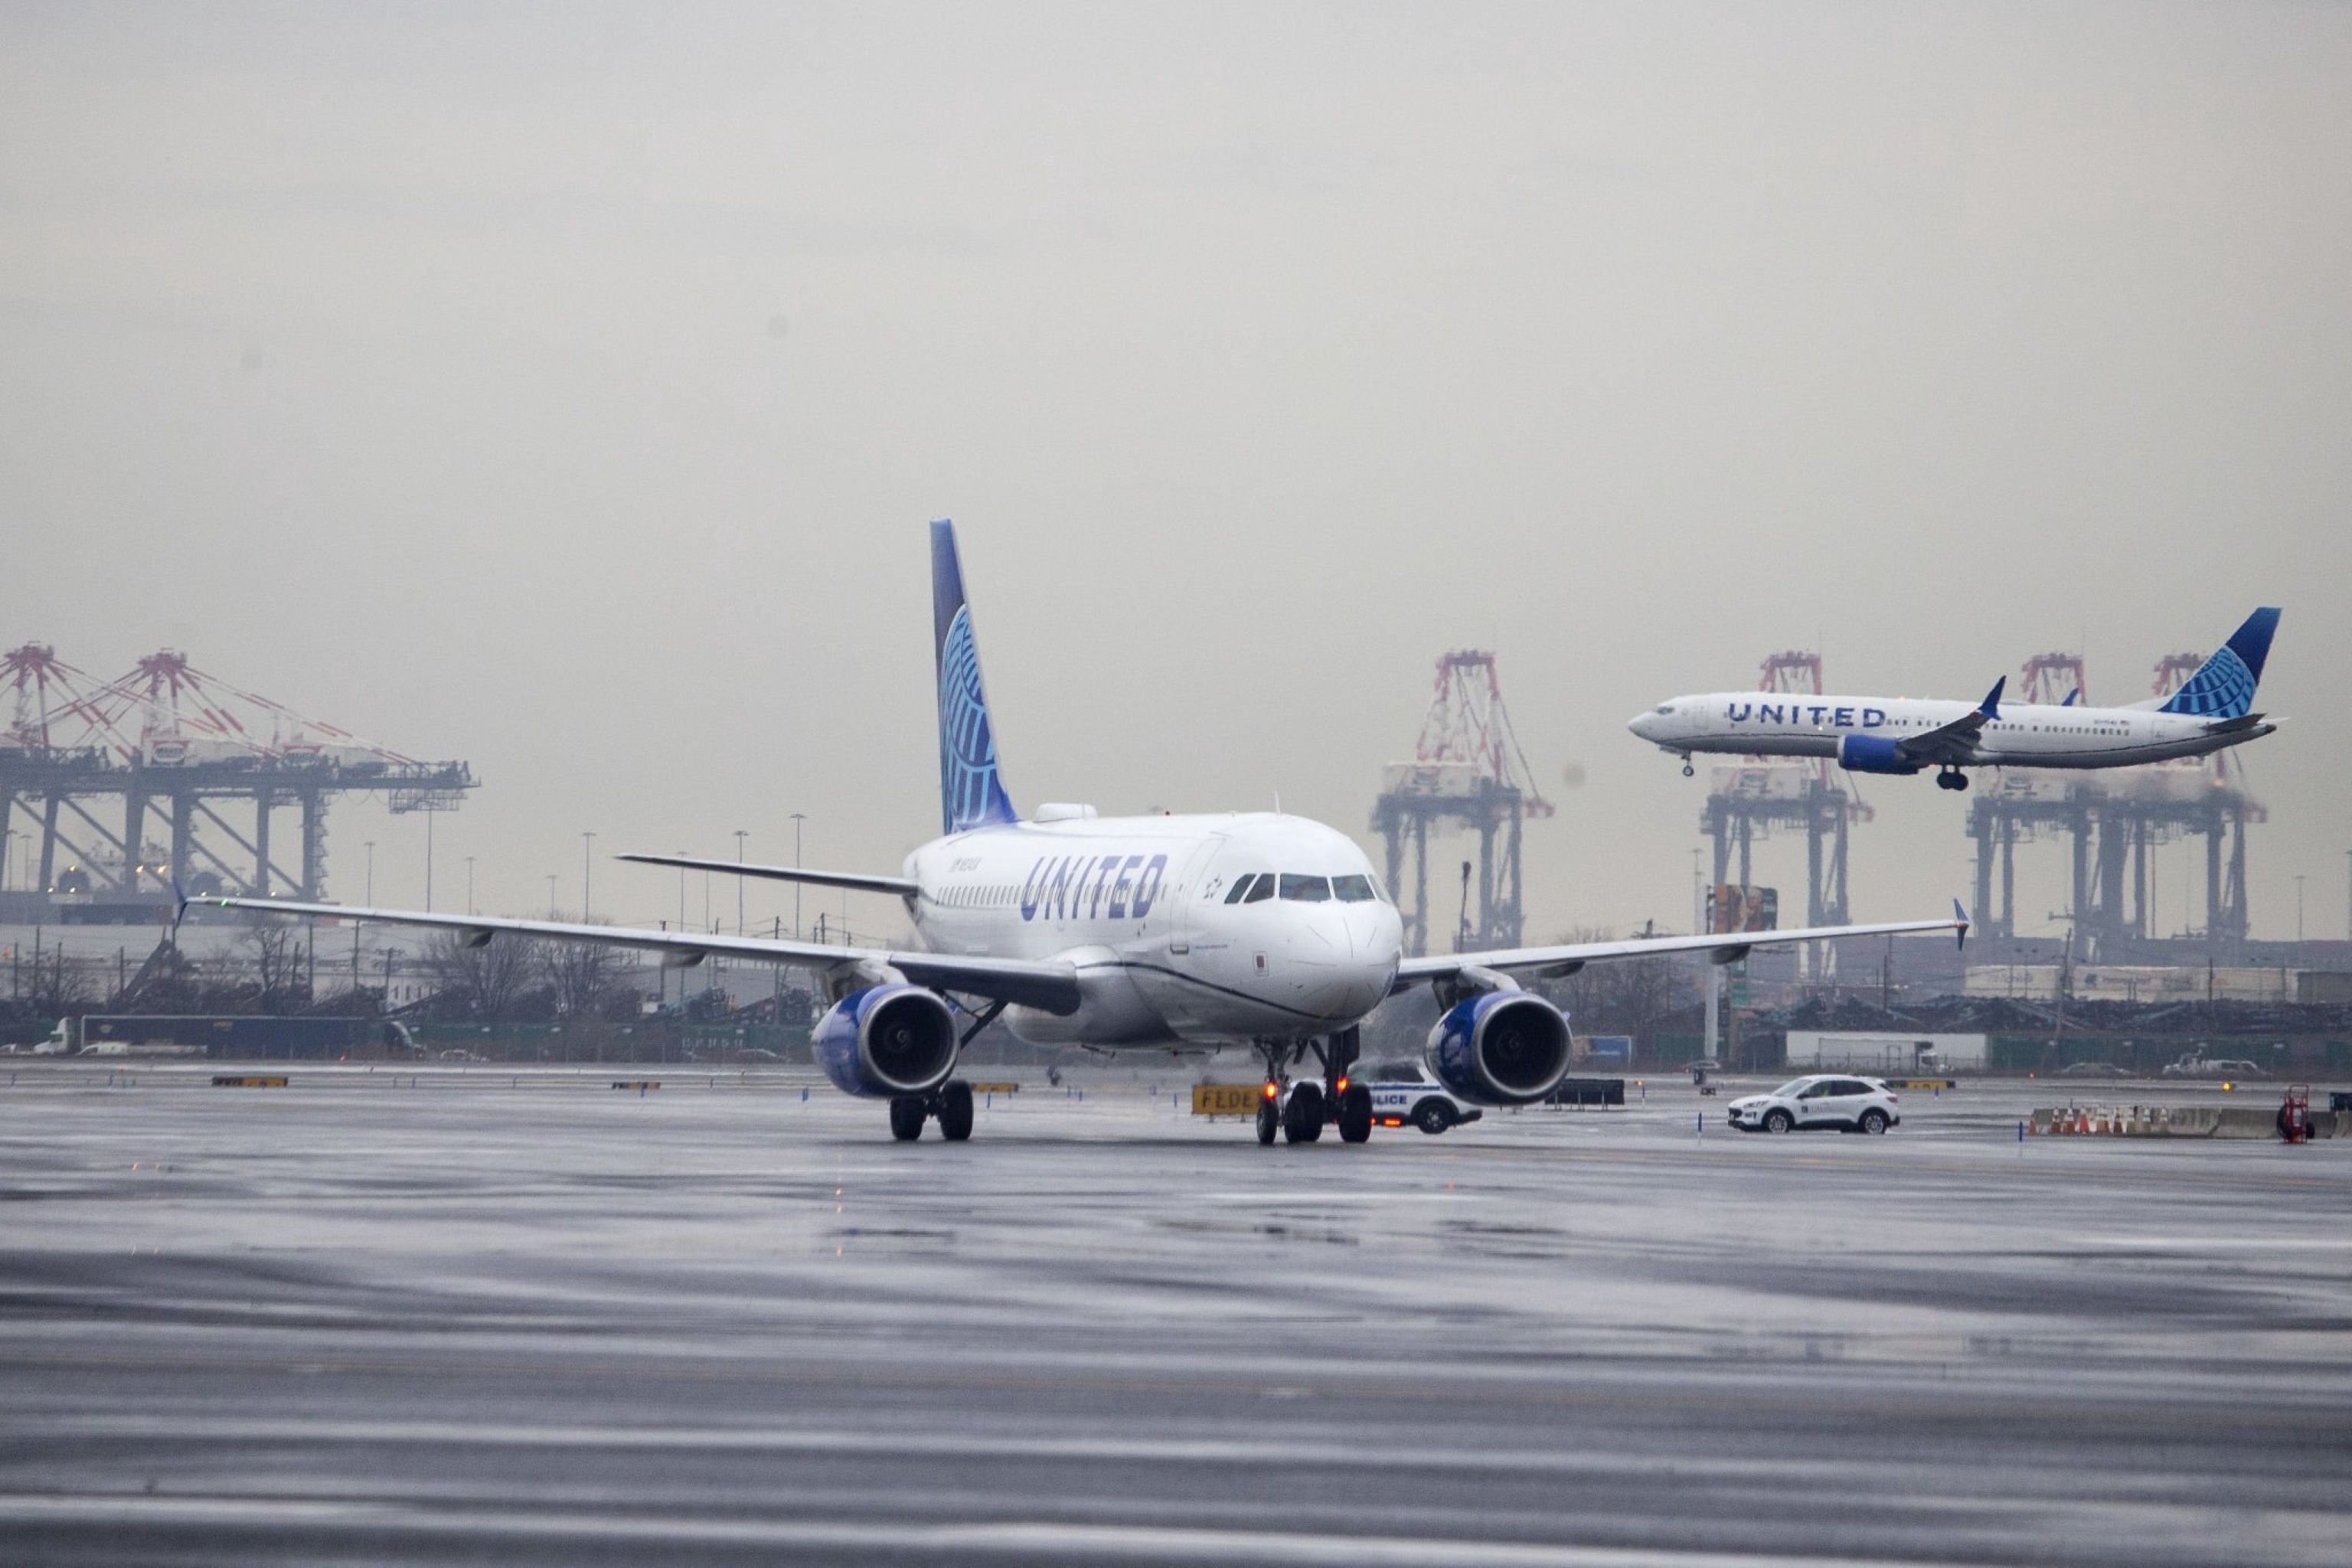 A United Airlines aircraft taxiing at Newark Airport while another lands in the background.